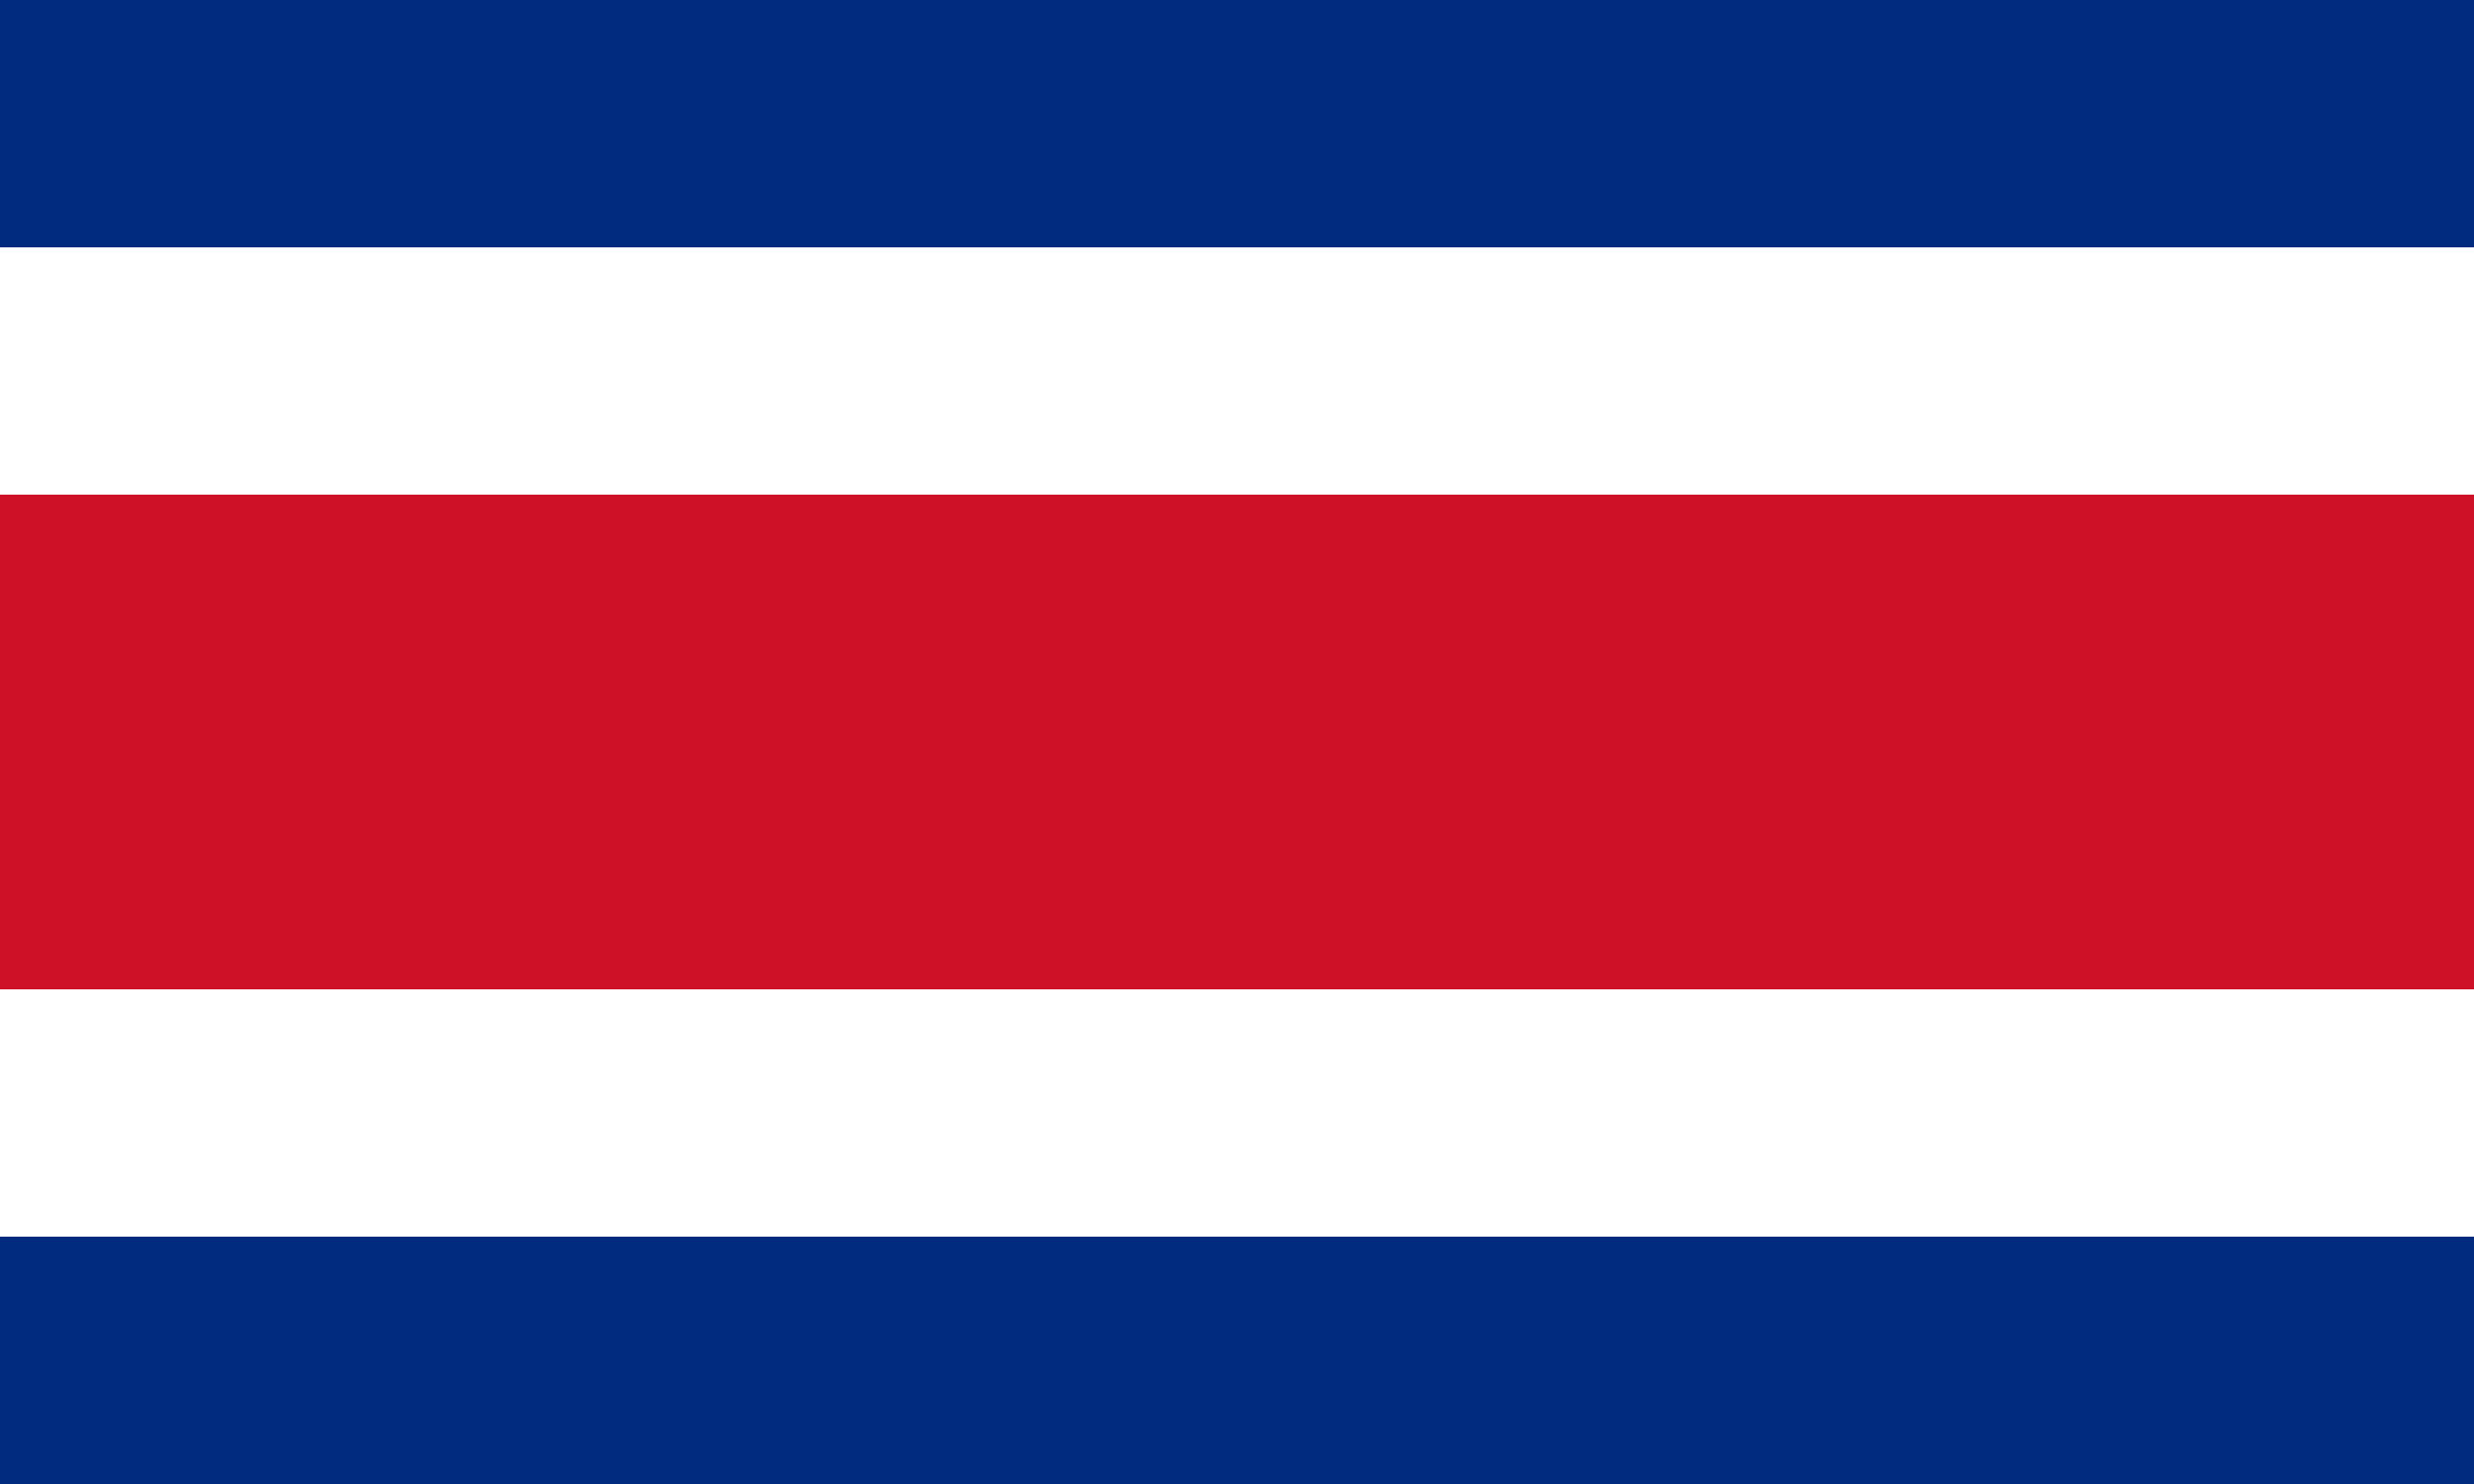 the image shows the costa rican flag